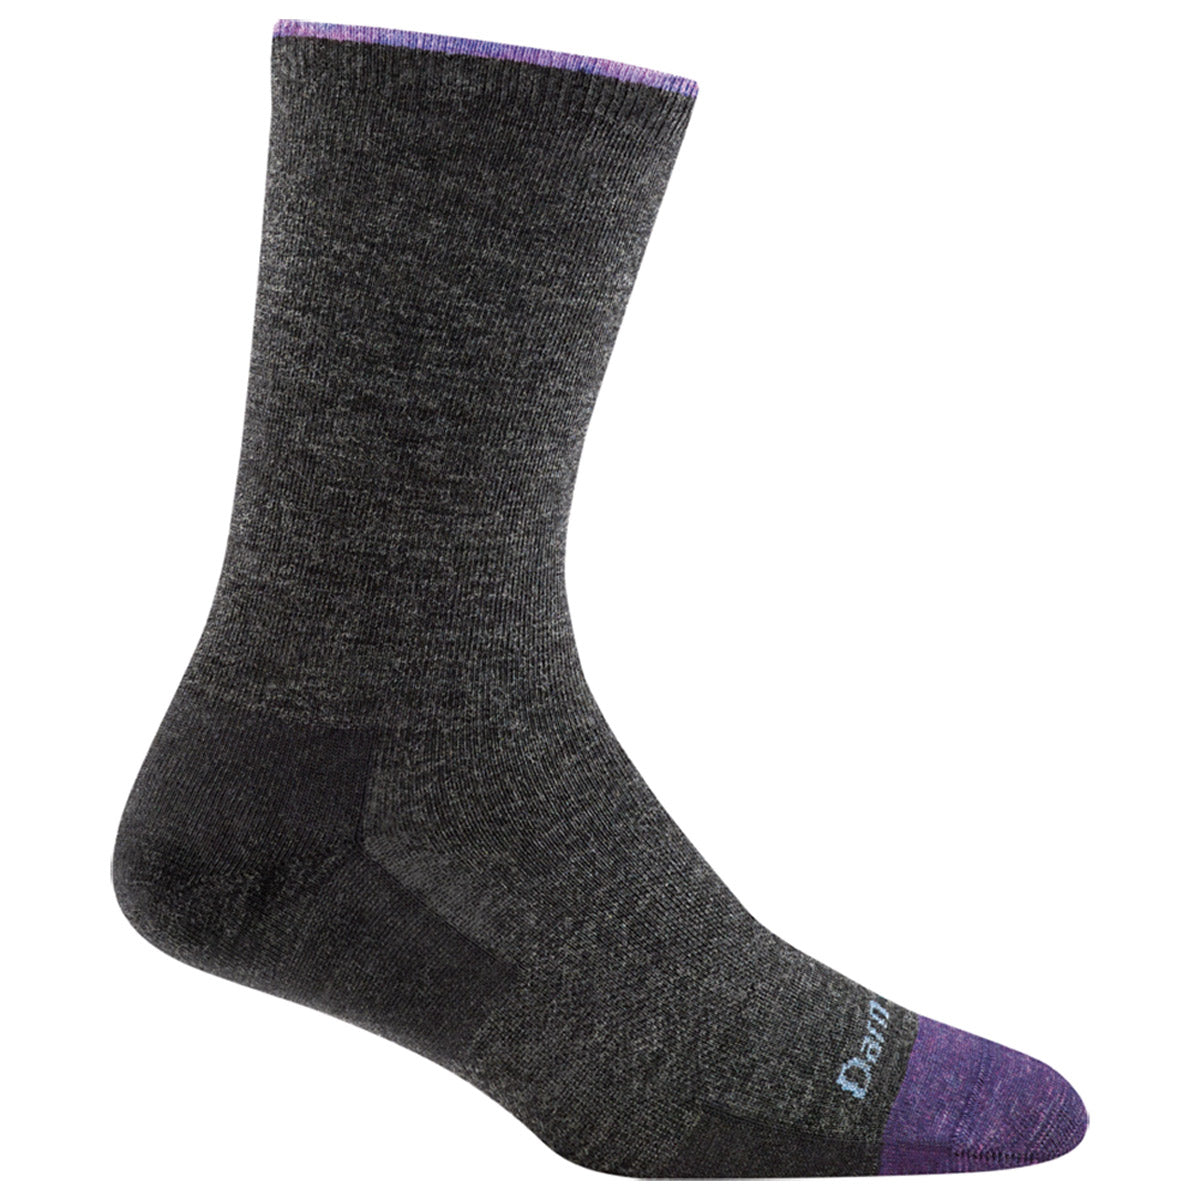 A single Darn Tough Solid Basic Crew Socks Charcoal - Womens with purple trim on a white background.